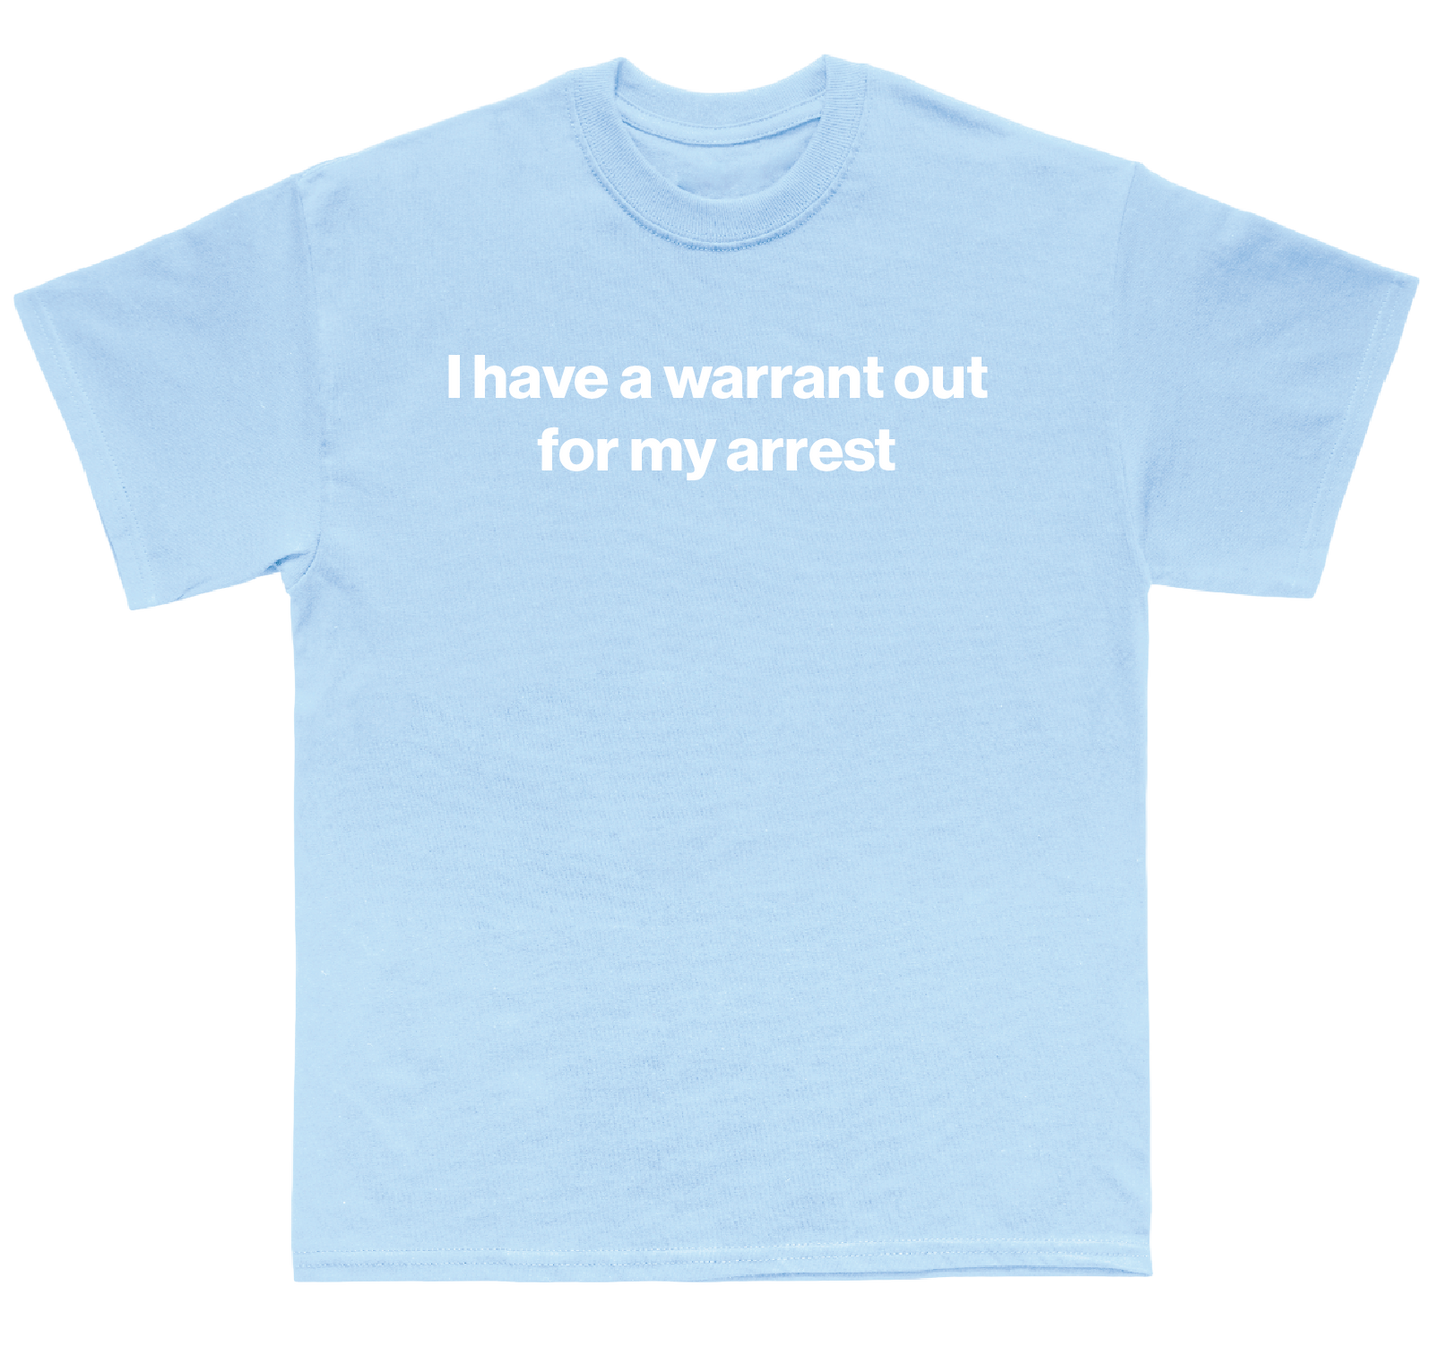 I have a warrant out for my arrest shirt